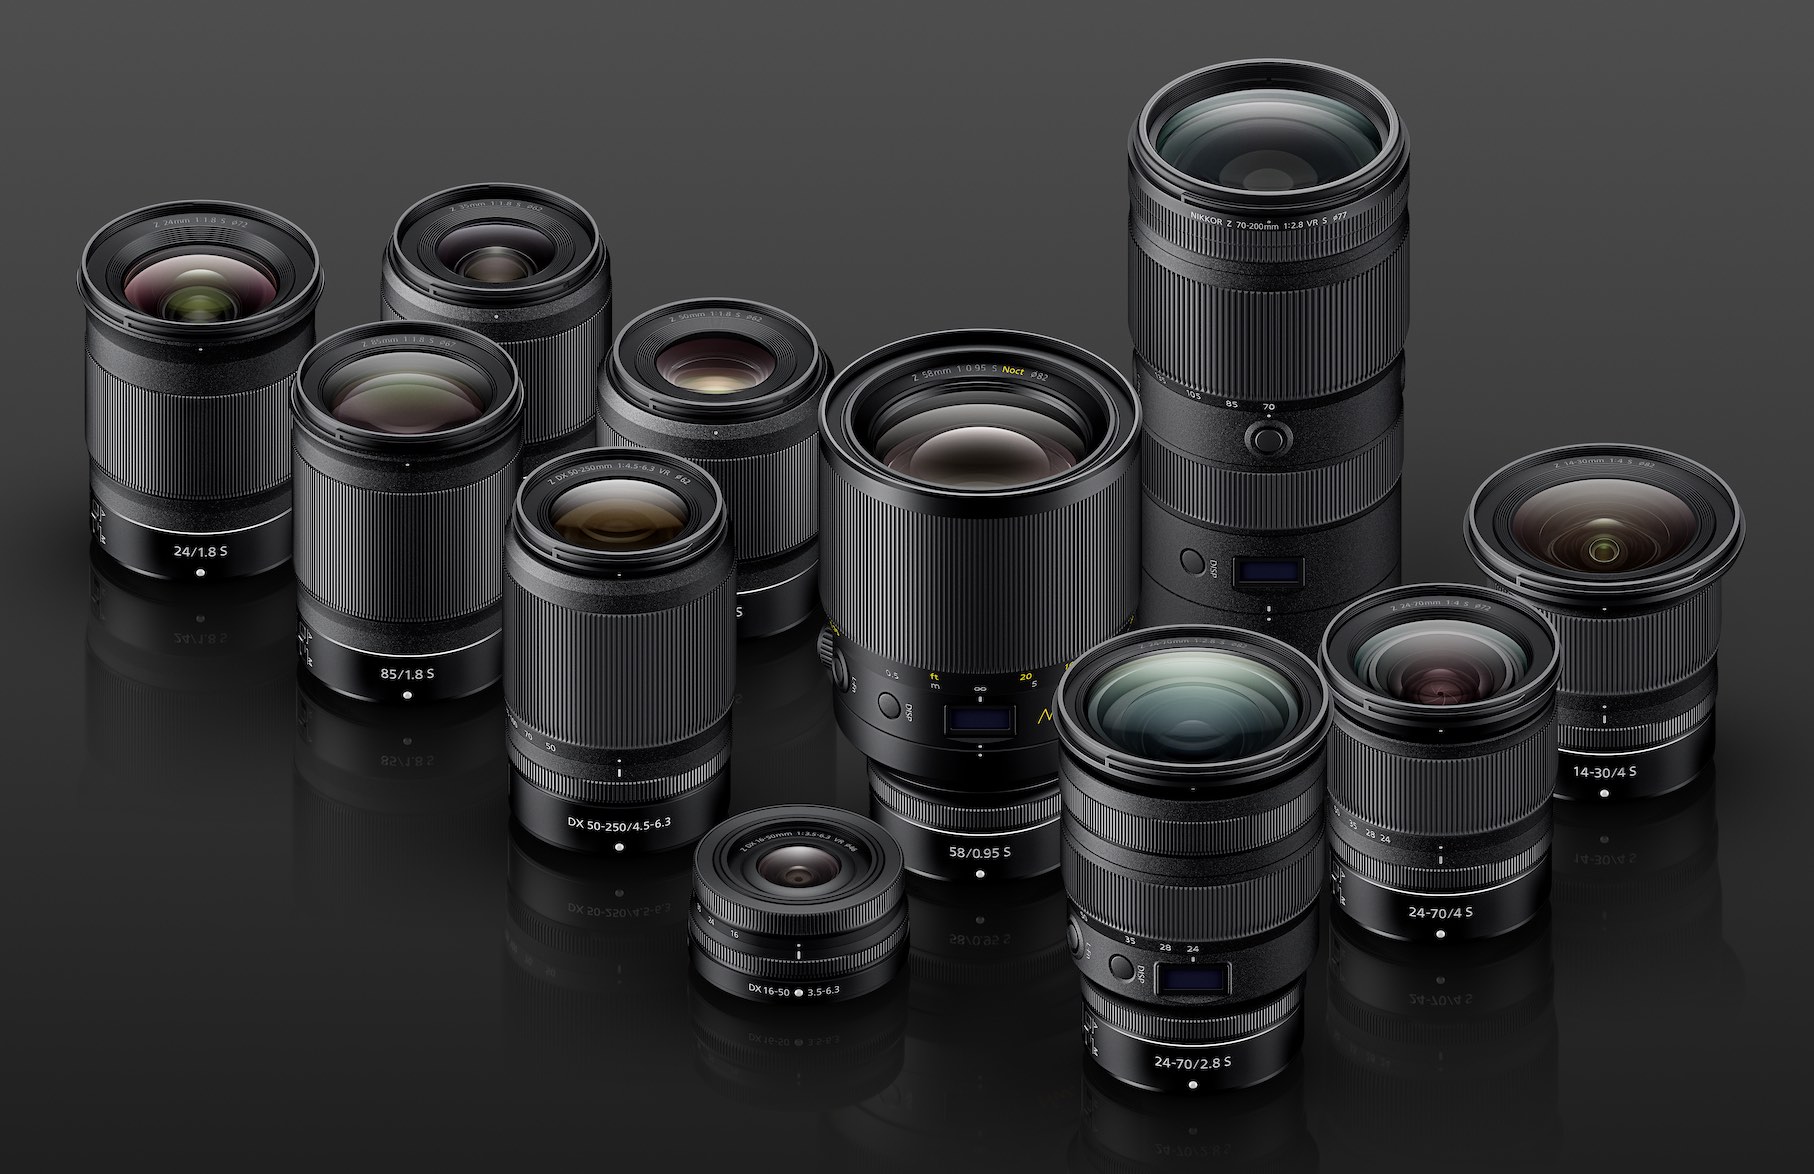 Nikon Nikkor Z Mirrorless Lens Lineup 11 Lenses Available Now 12 More To Come By 2021 Nikon Rumors